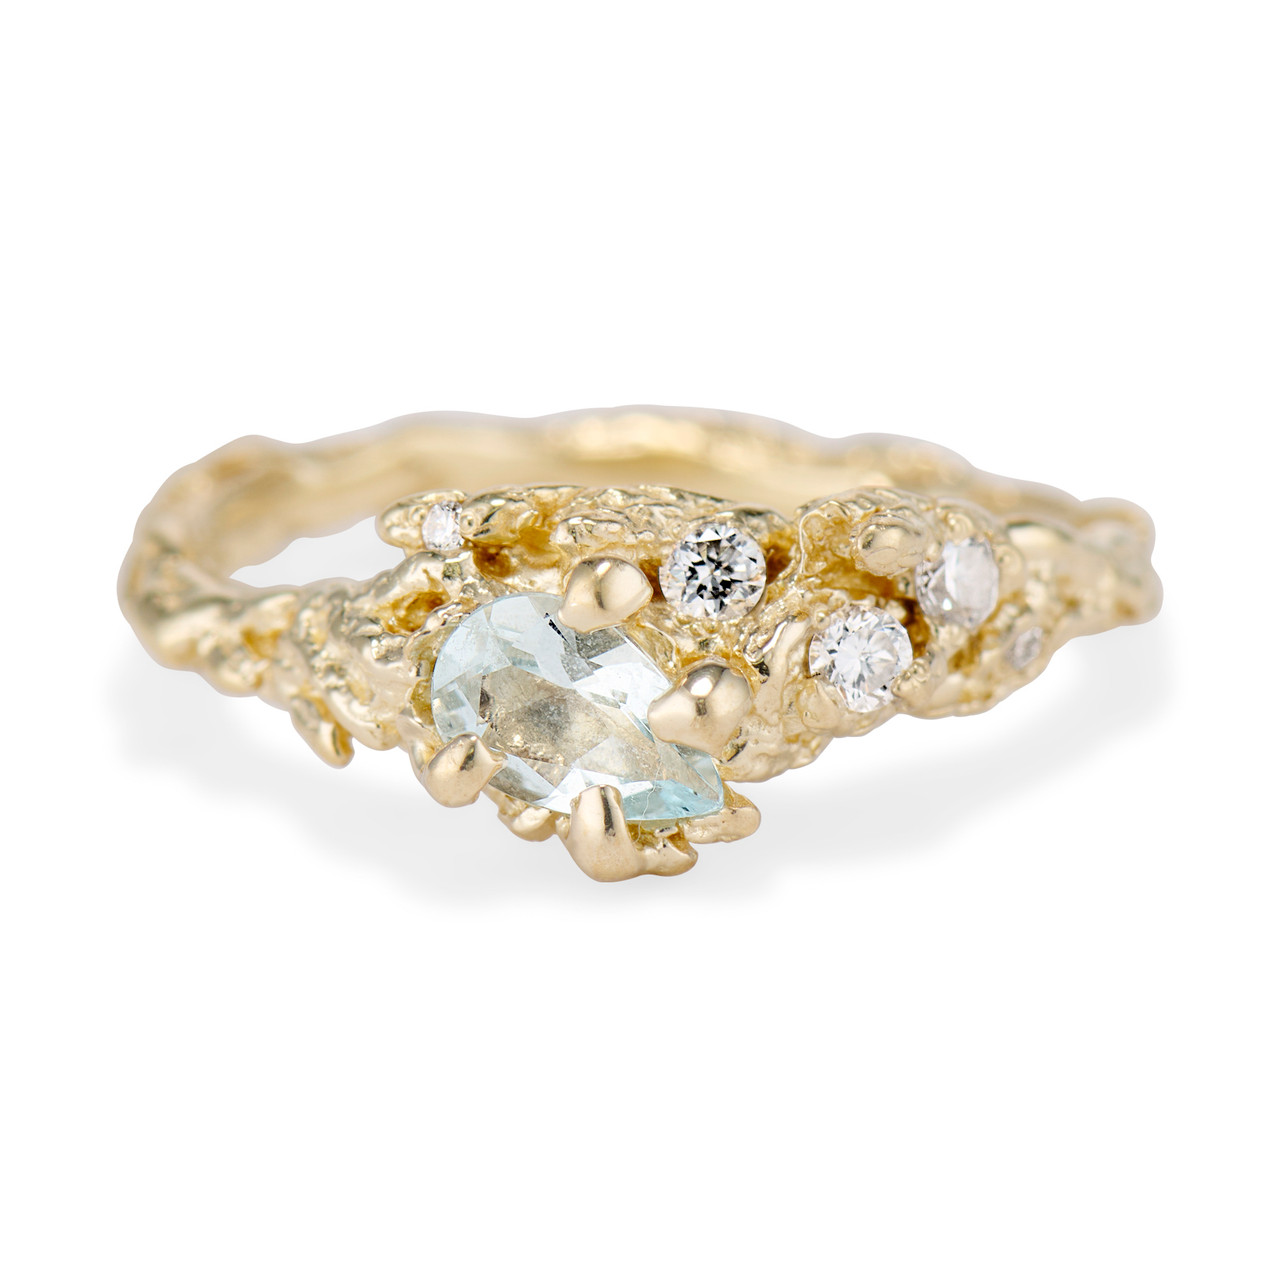 The Juniper Aquamarine and Diamond Cluster Ring. A pear aquamarine is held in place by four prongs while diamonds add shine to the band.